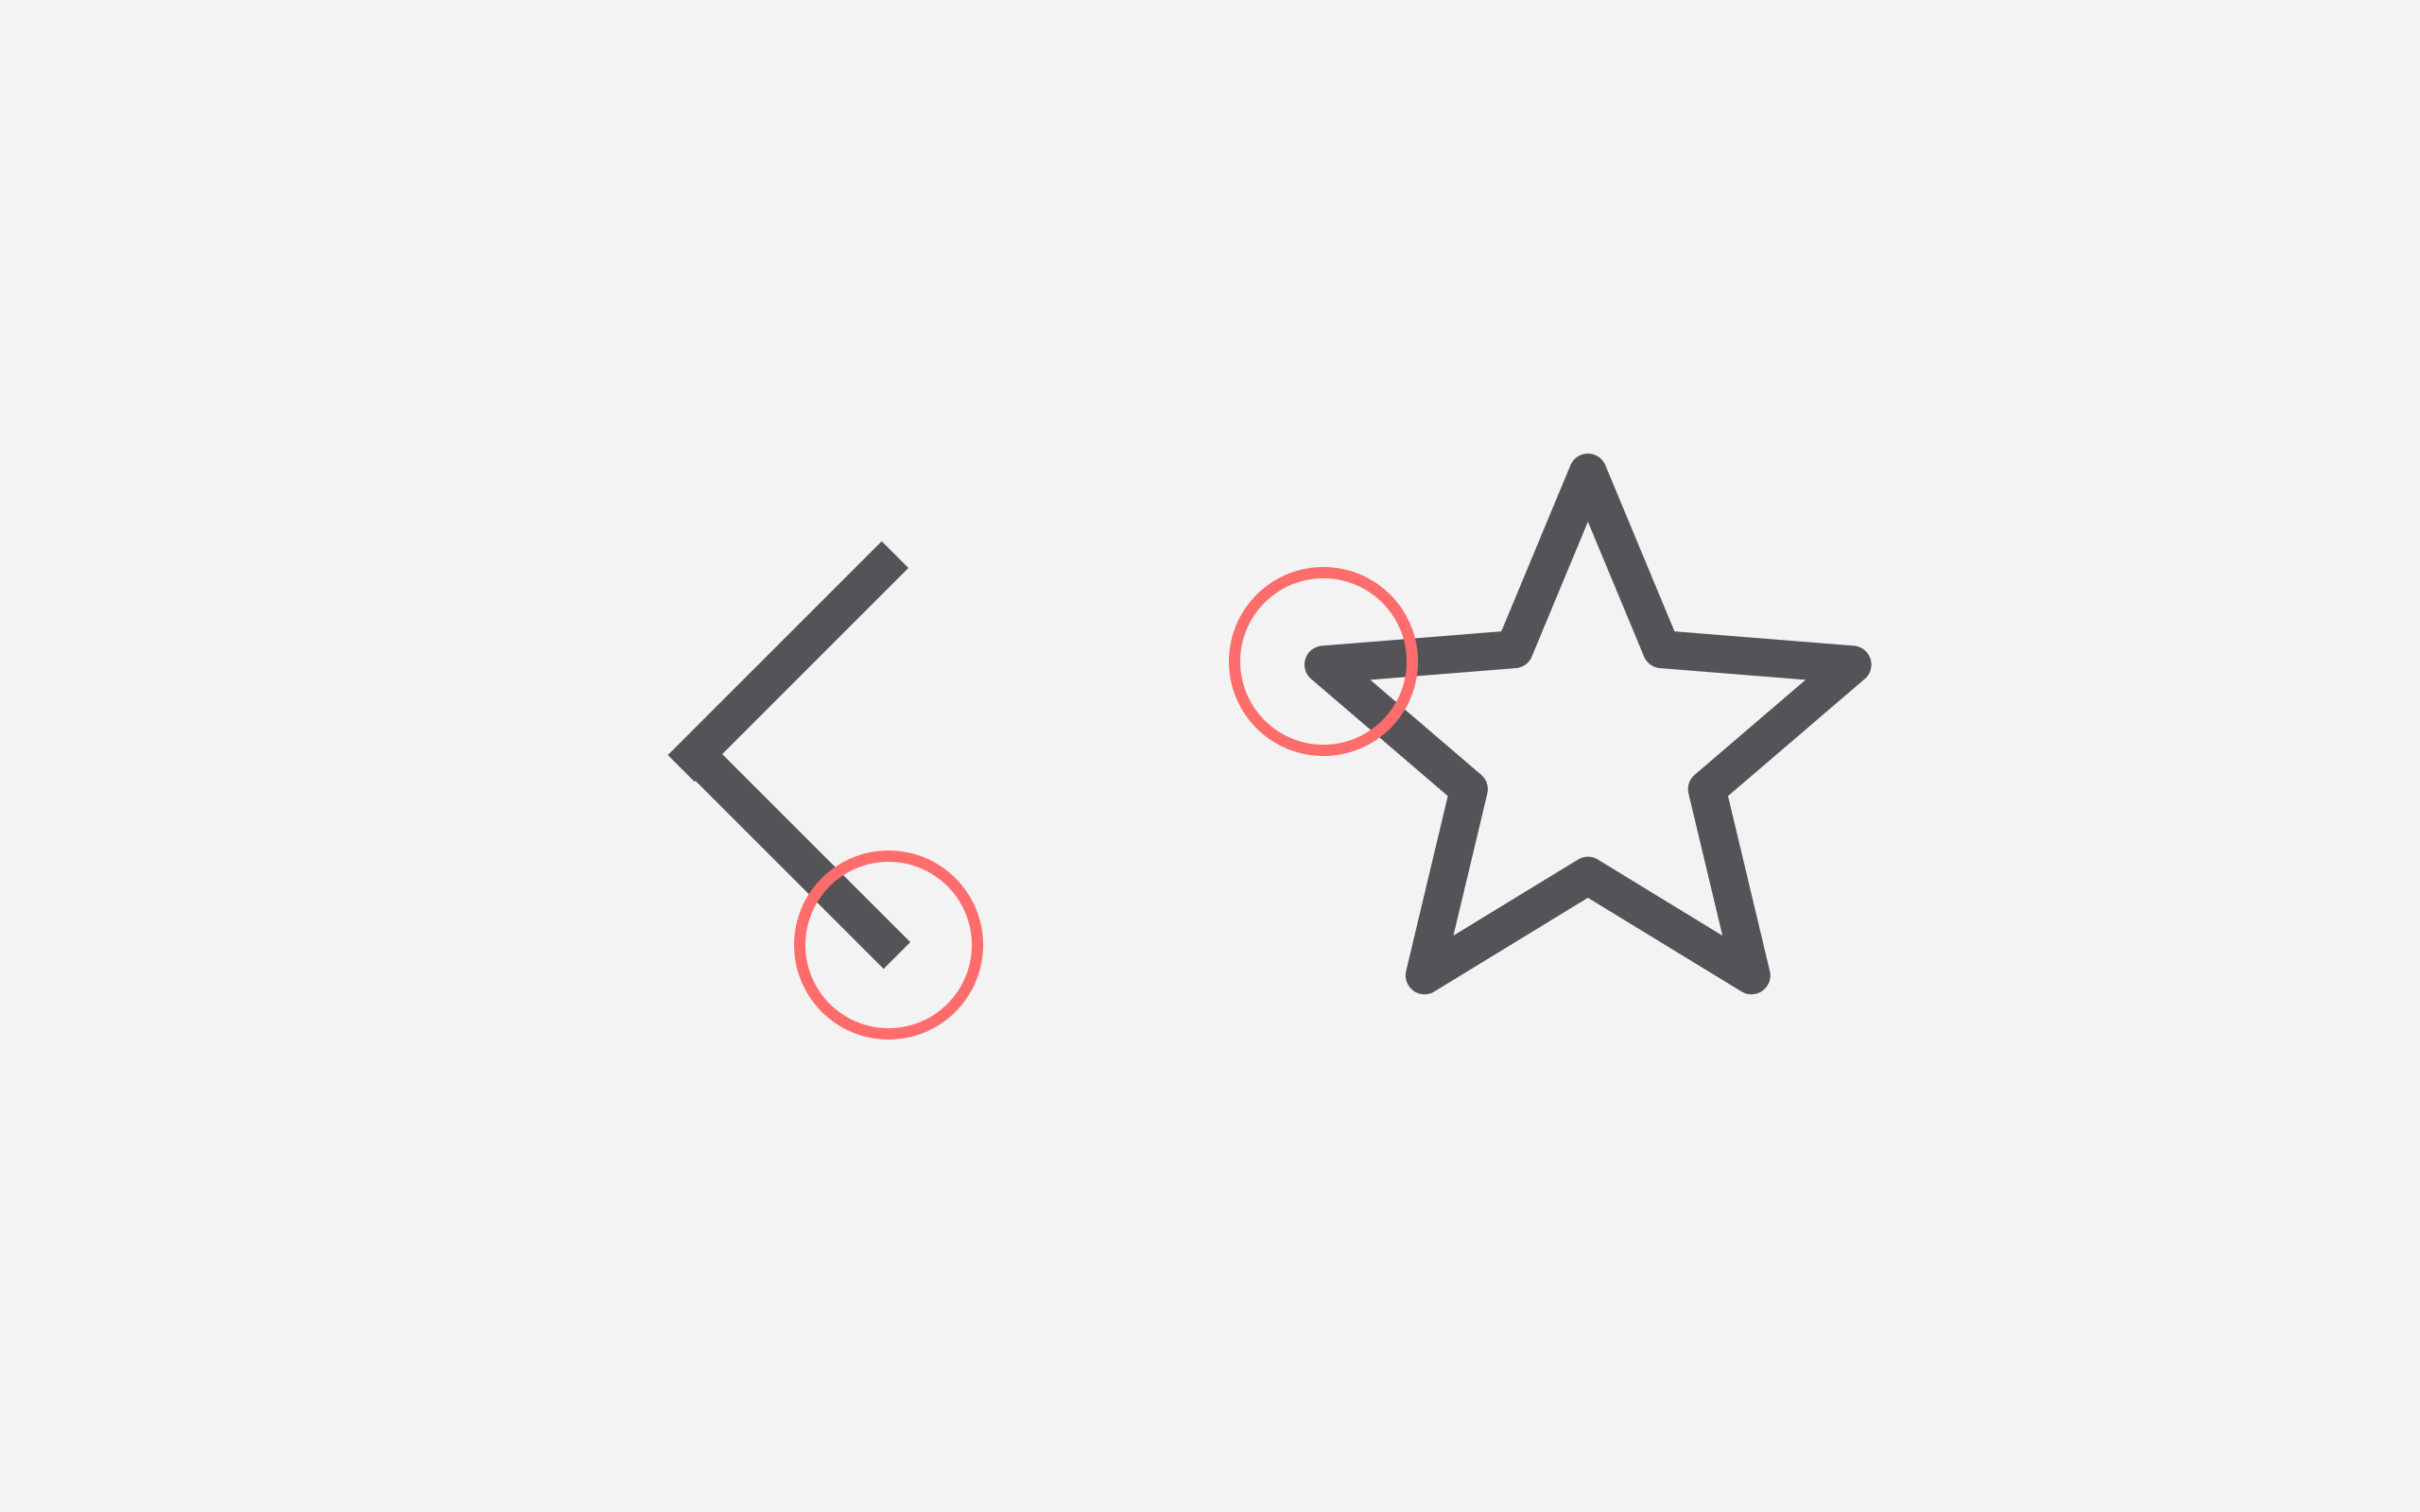 Image of two icons with different corner styles